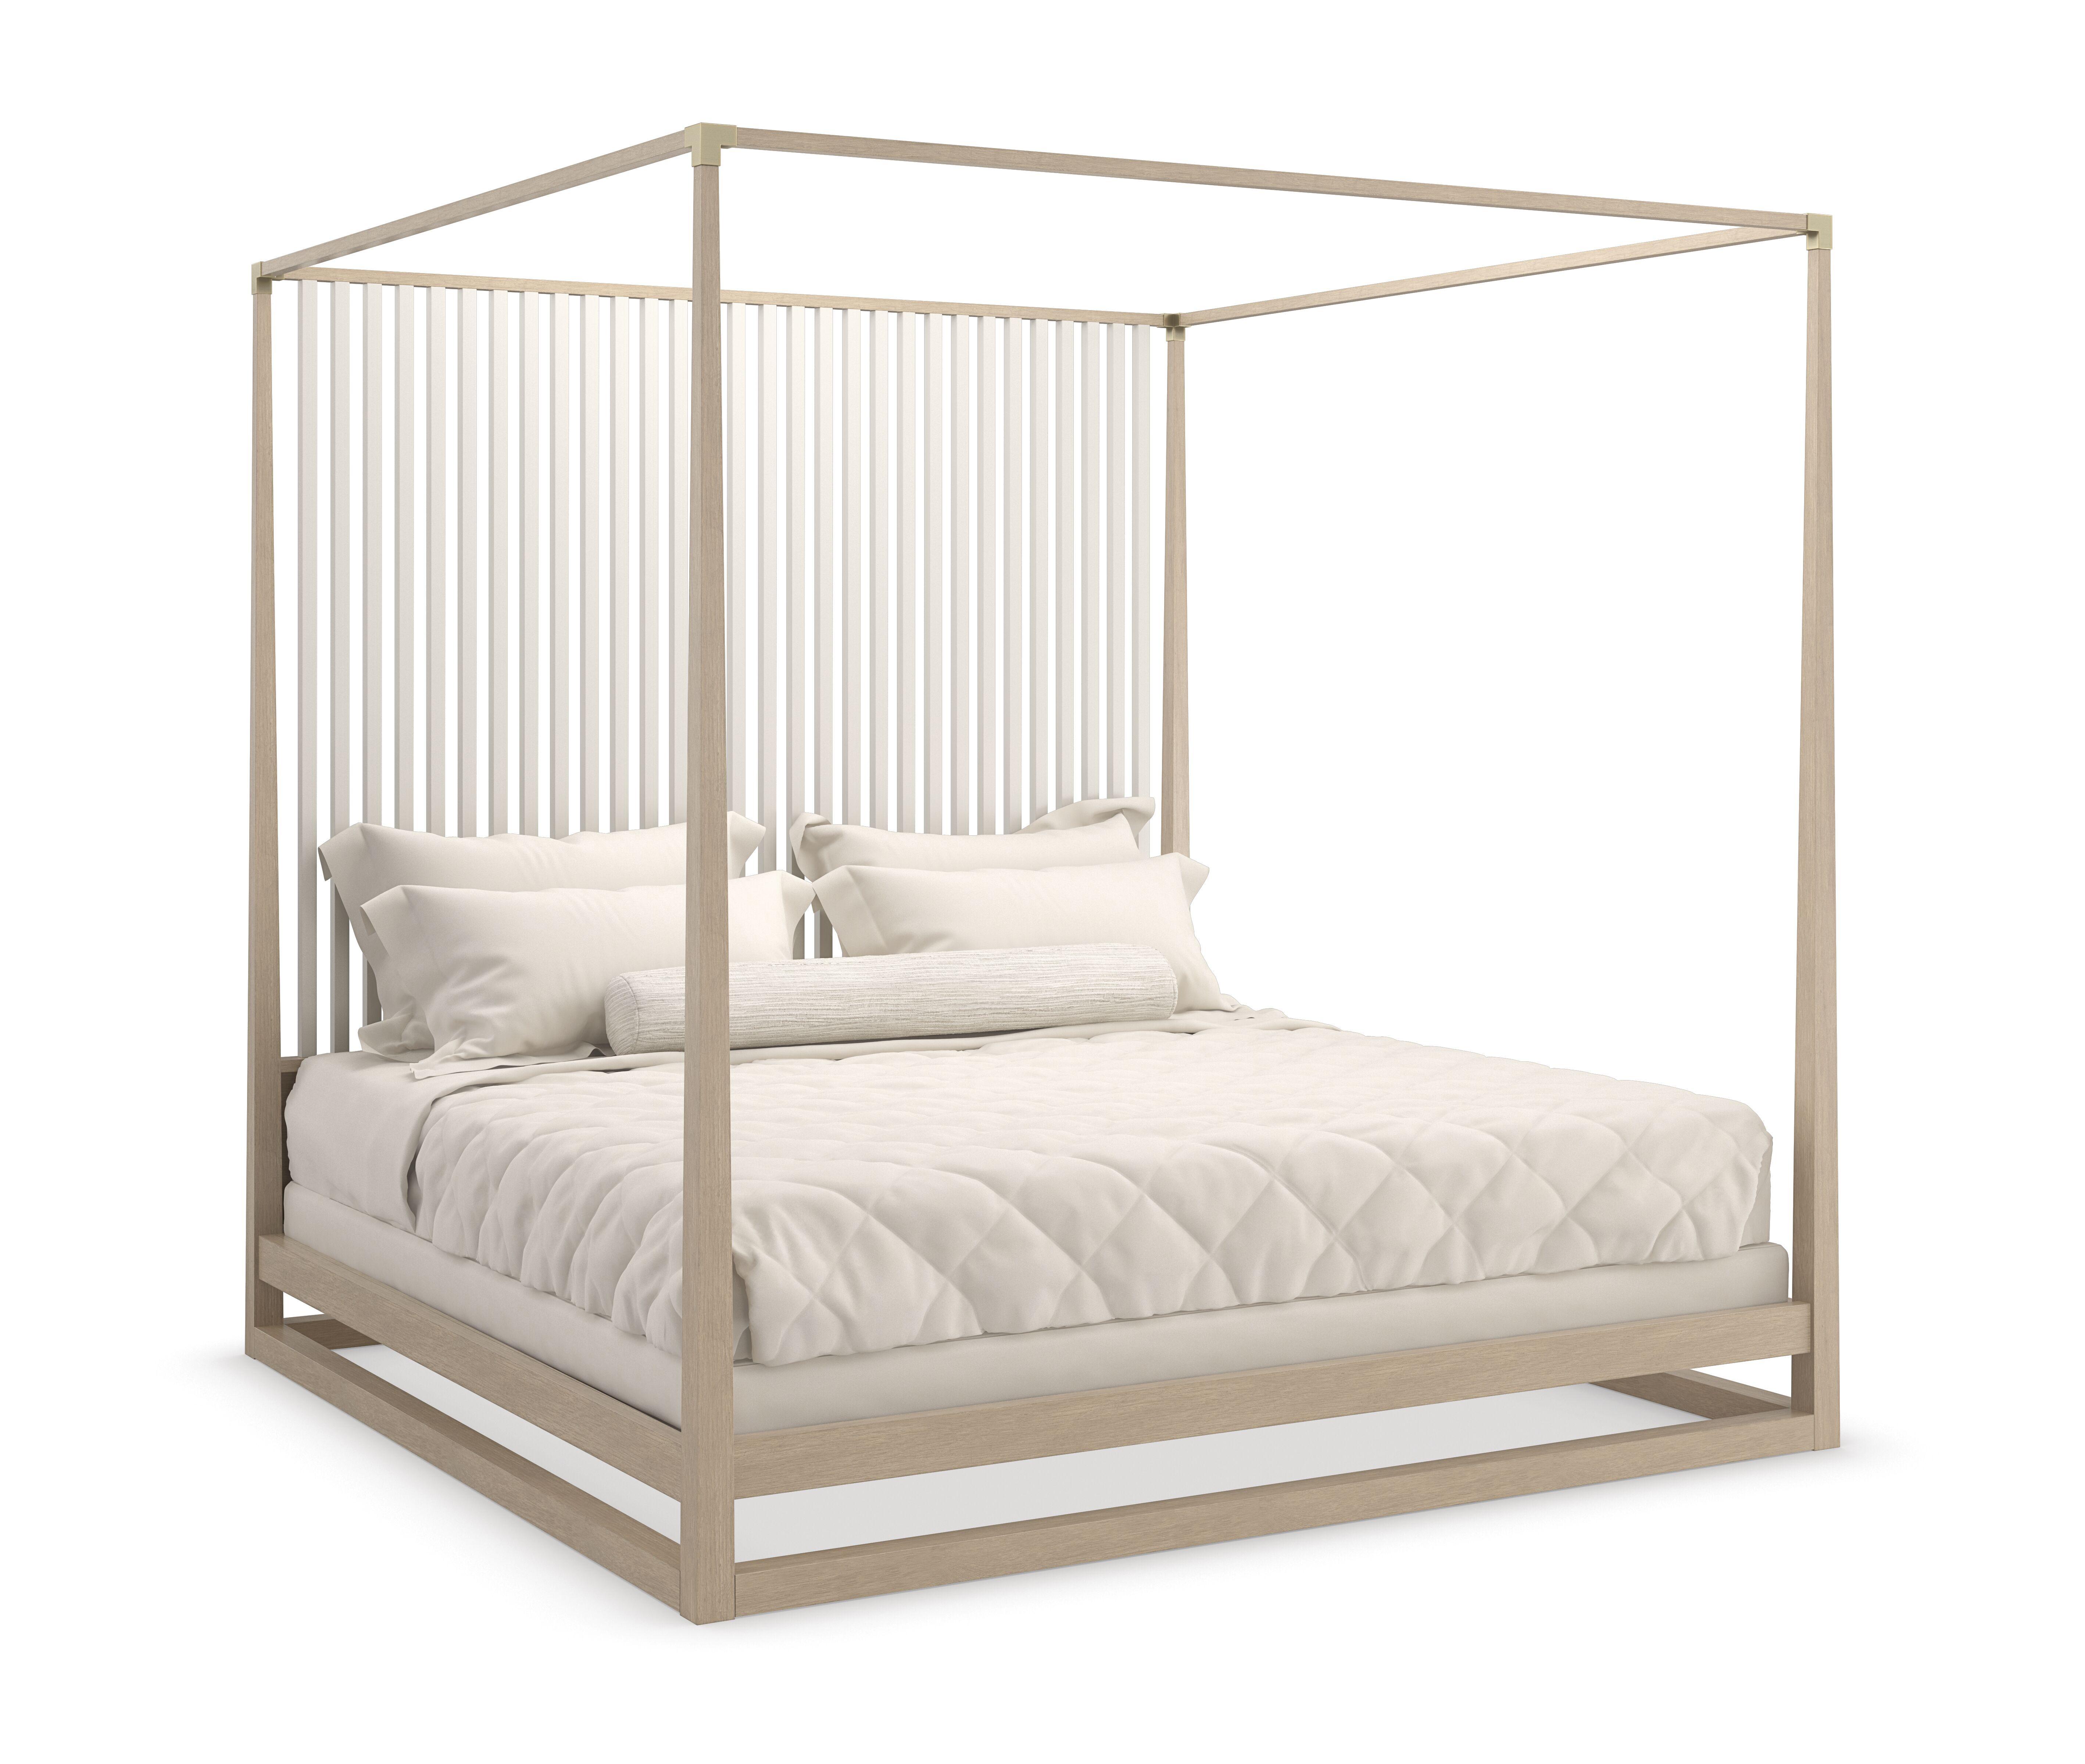 Contemporary Canopy Bed PINSTRIPE LIGHT CLA-022-102 in Almond, Champagne 